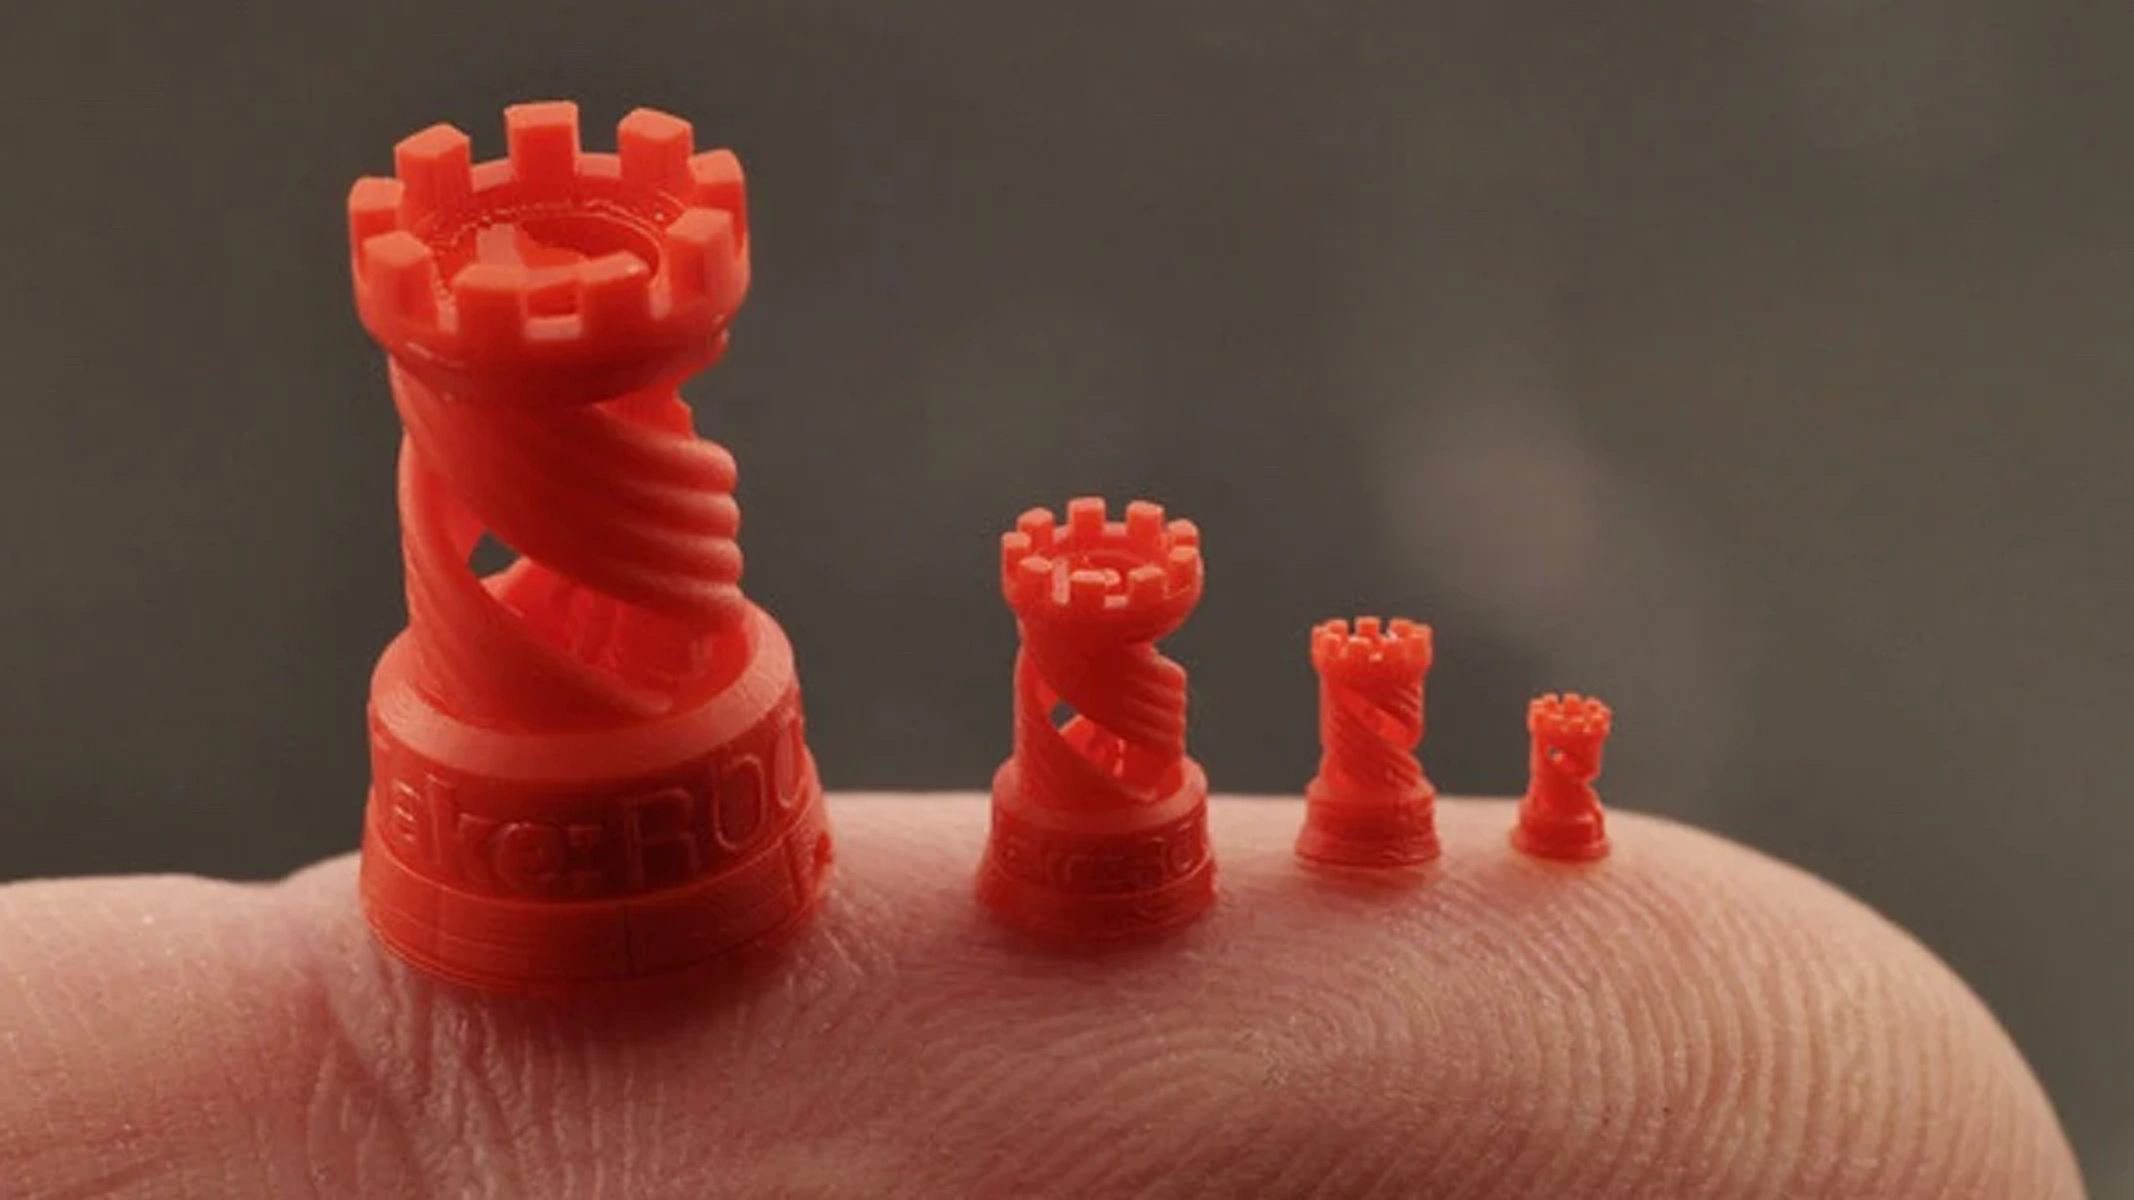 How Small Can A 3D Printer Print